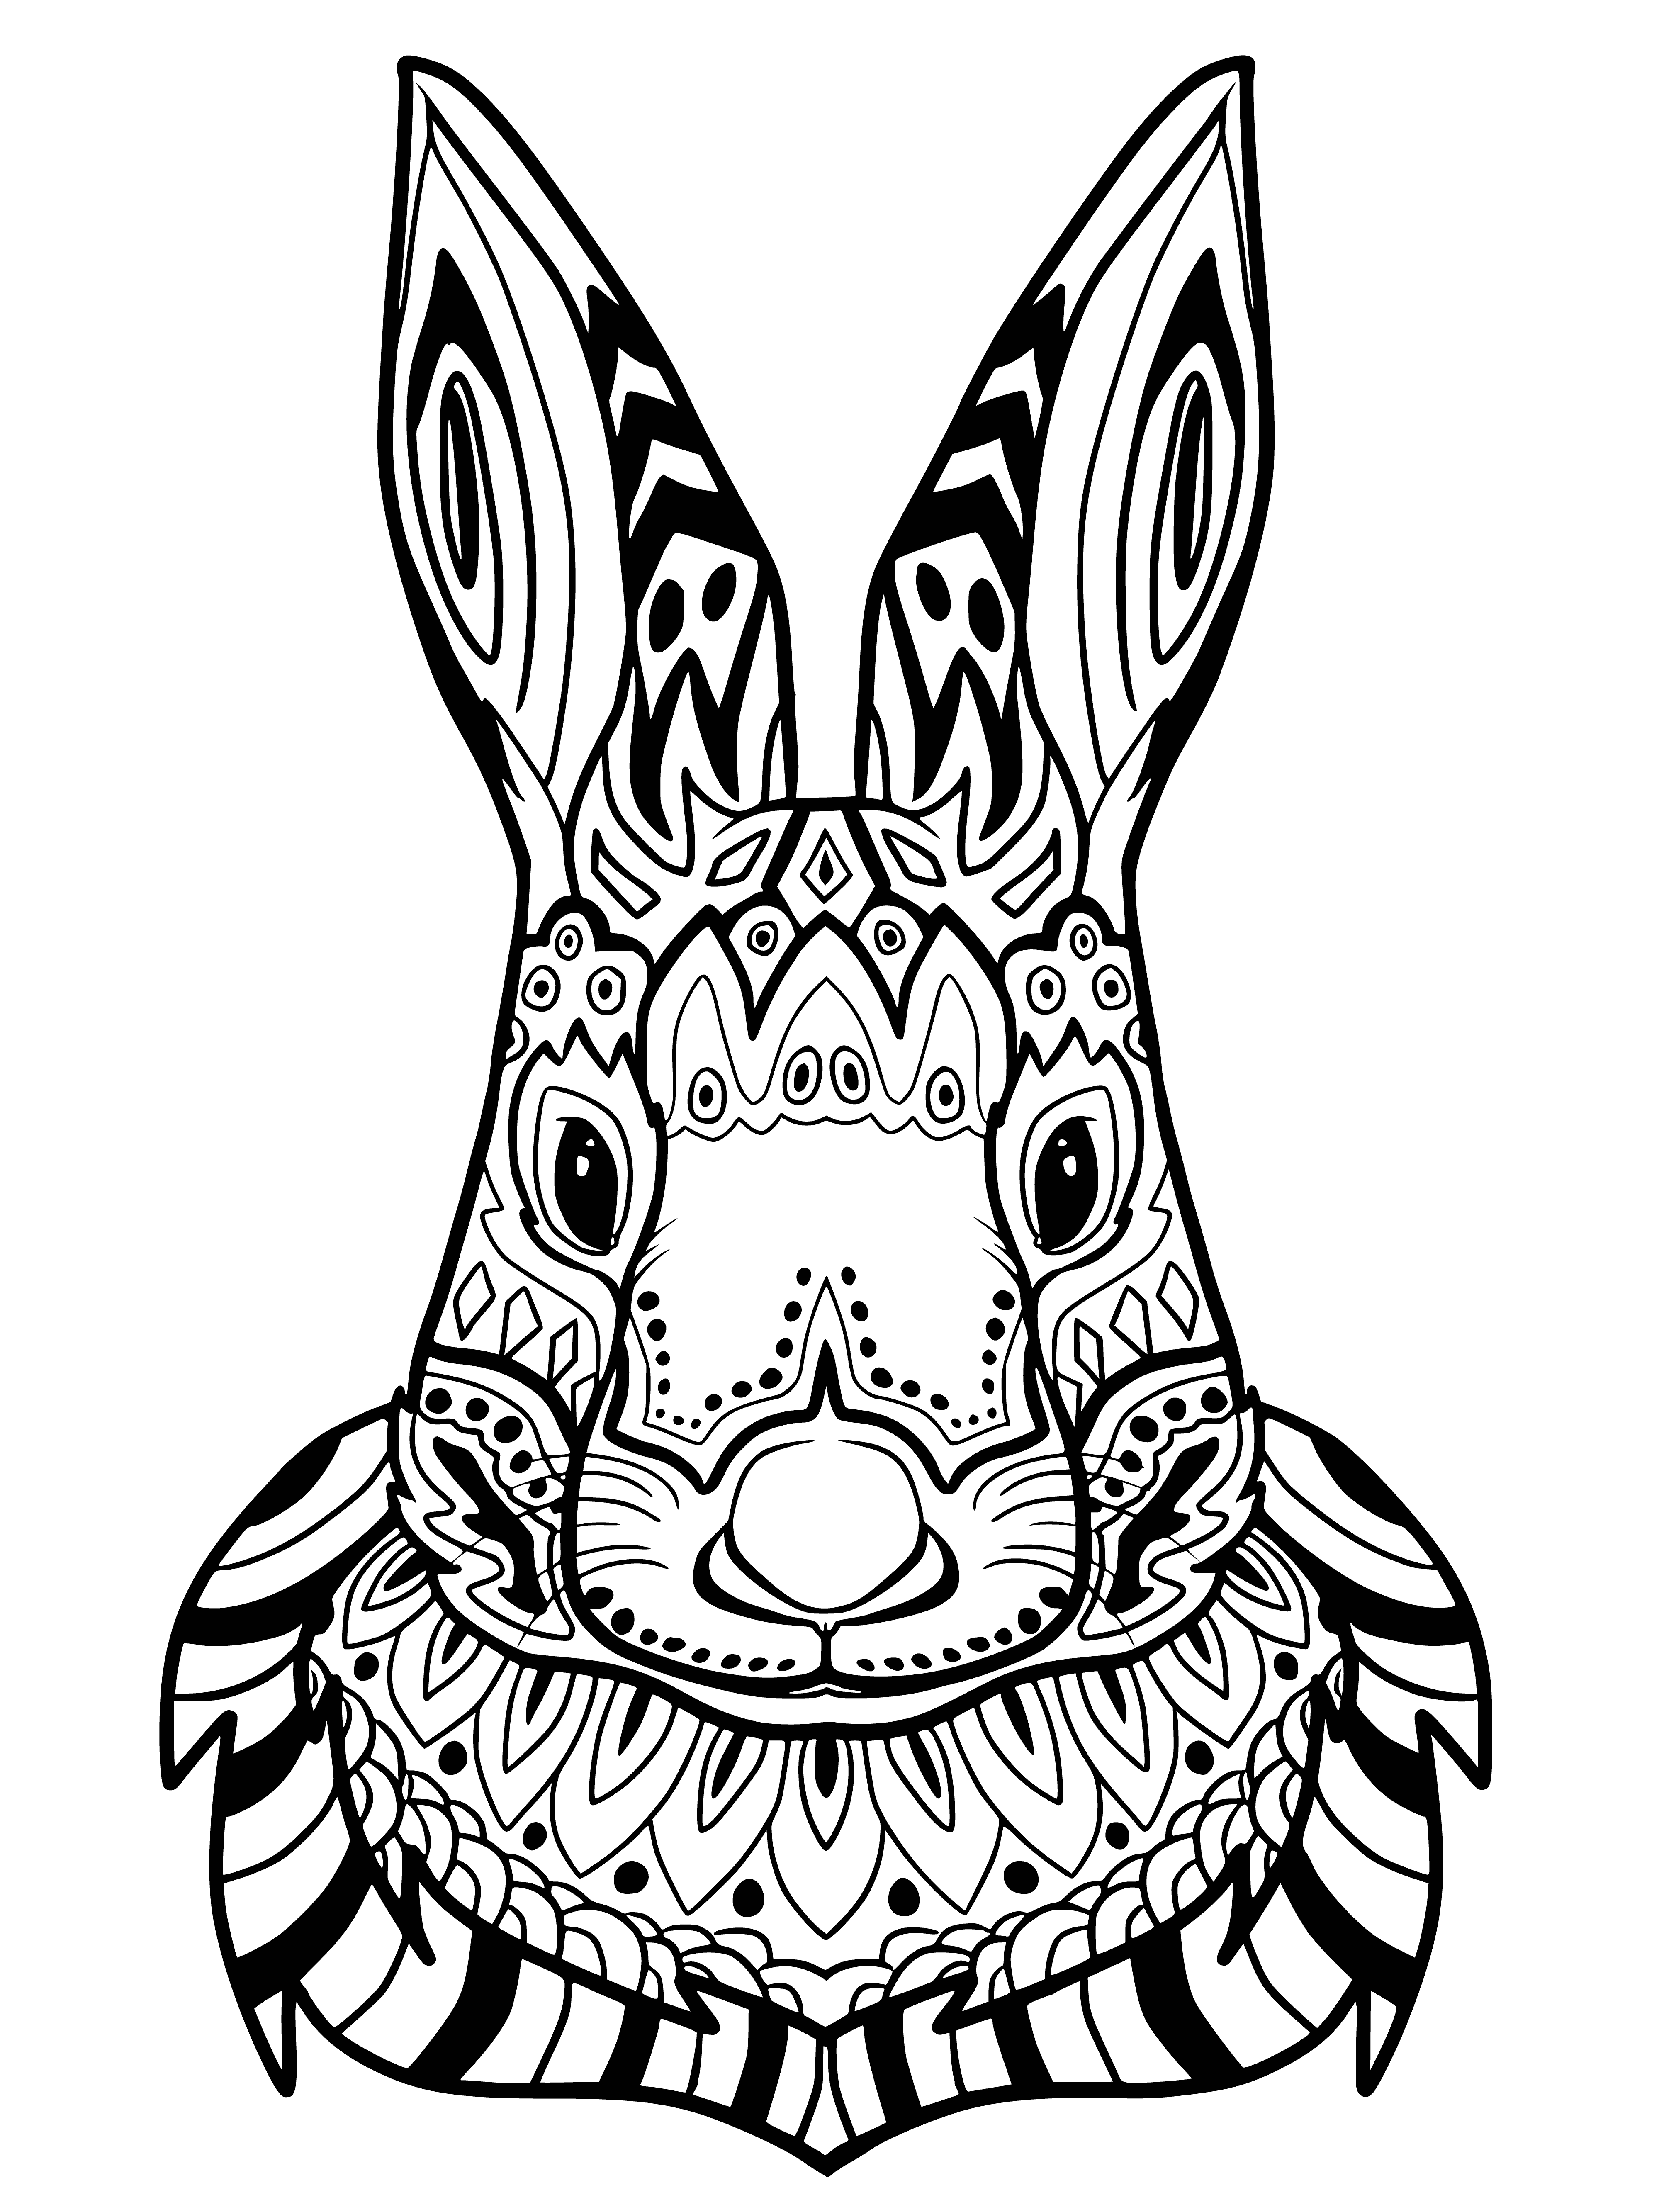 coloring page: A hare enjoys the peaceful garden, eyes closed, face content in a flower-filled world.